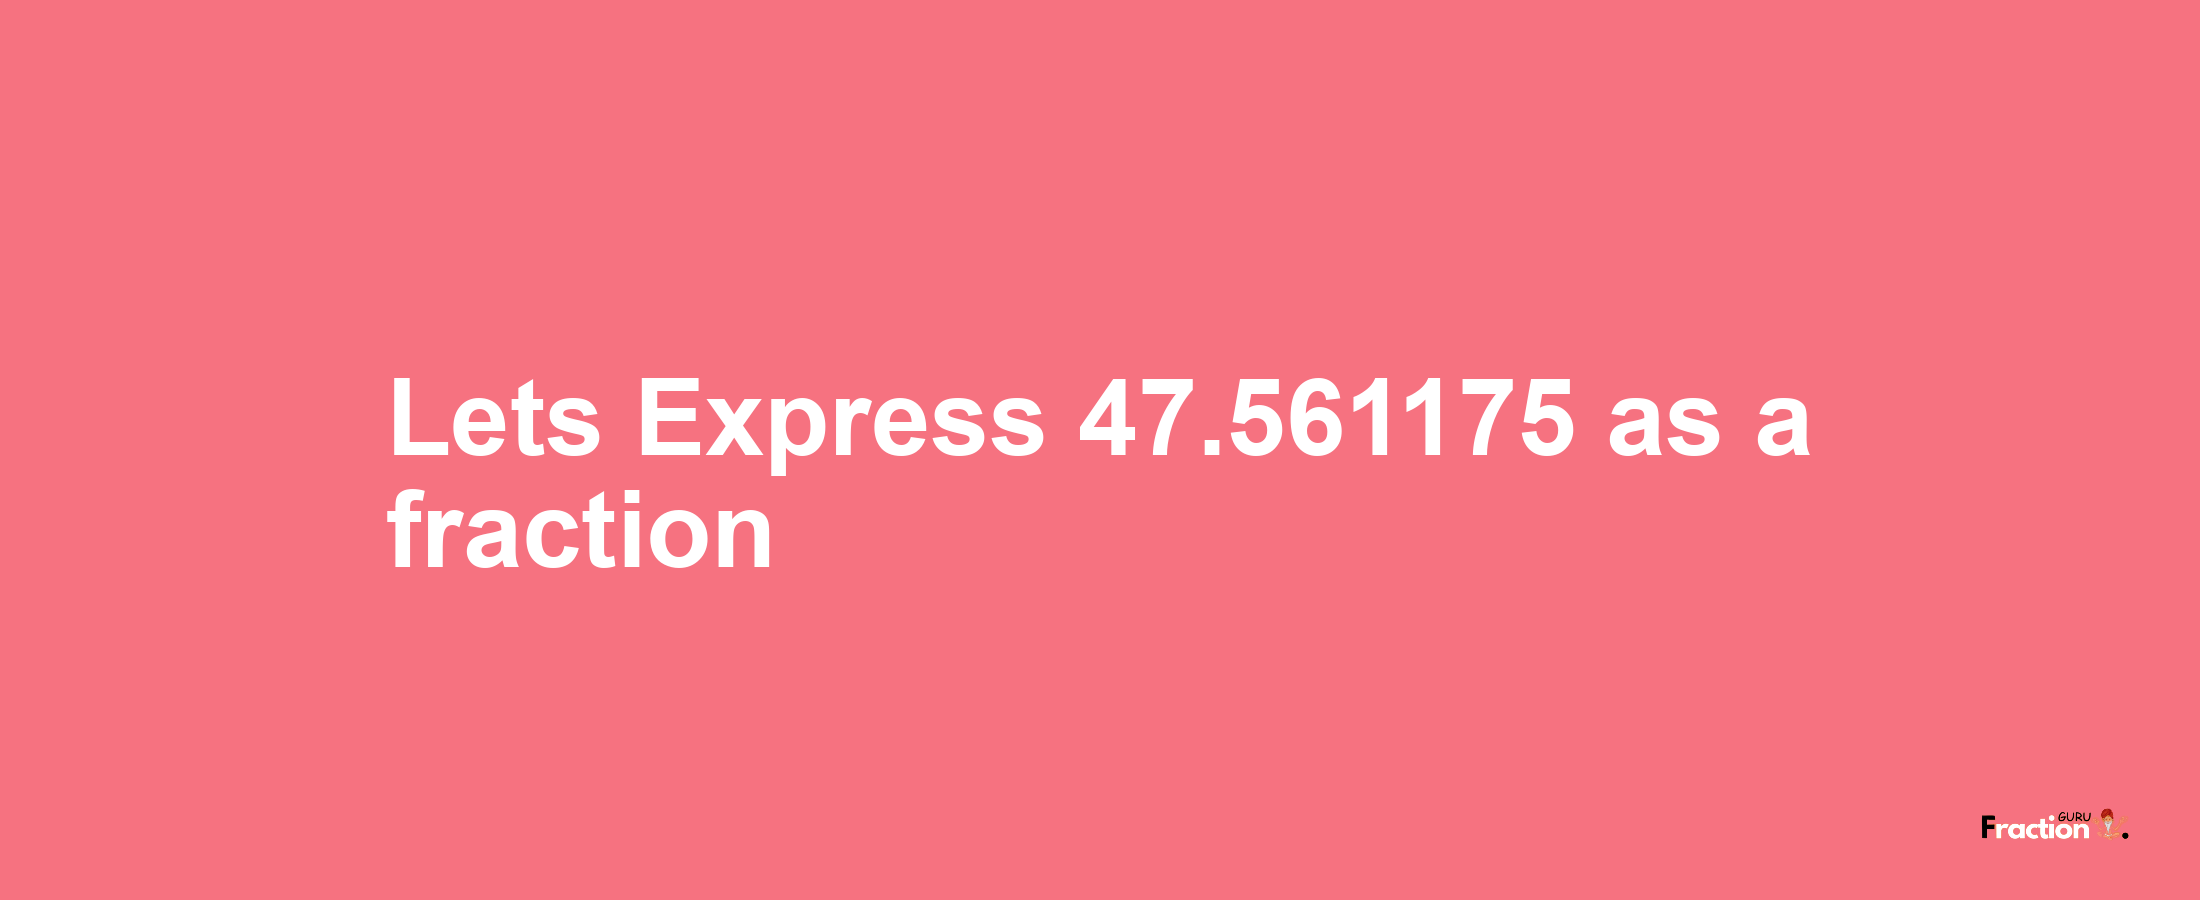 Lets Express 47.561175 as afraction